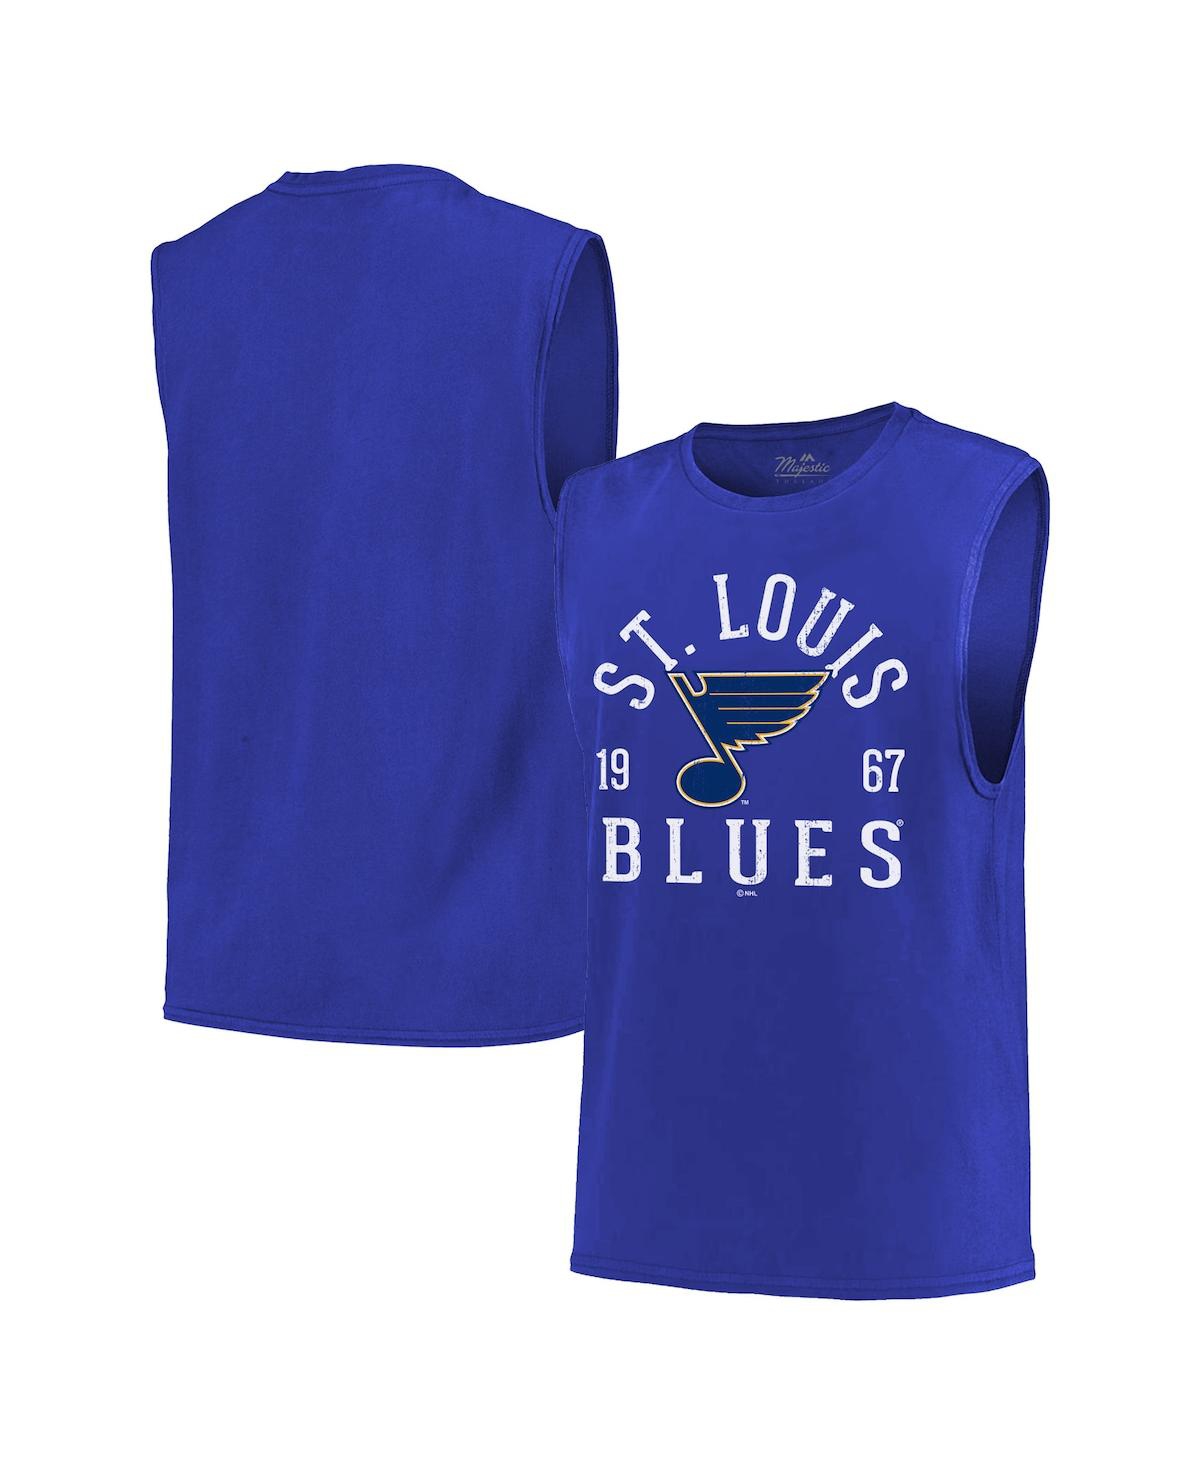 Men's Majestic Threads Blue St. Louis Blues Softhand Muscle Tank Top - Blue